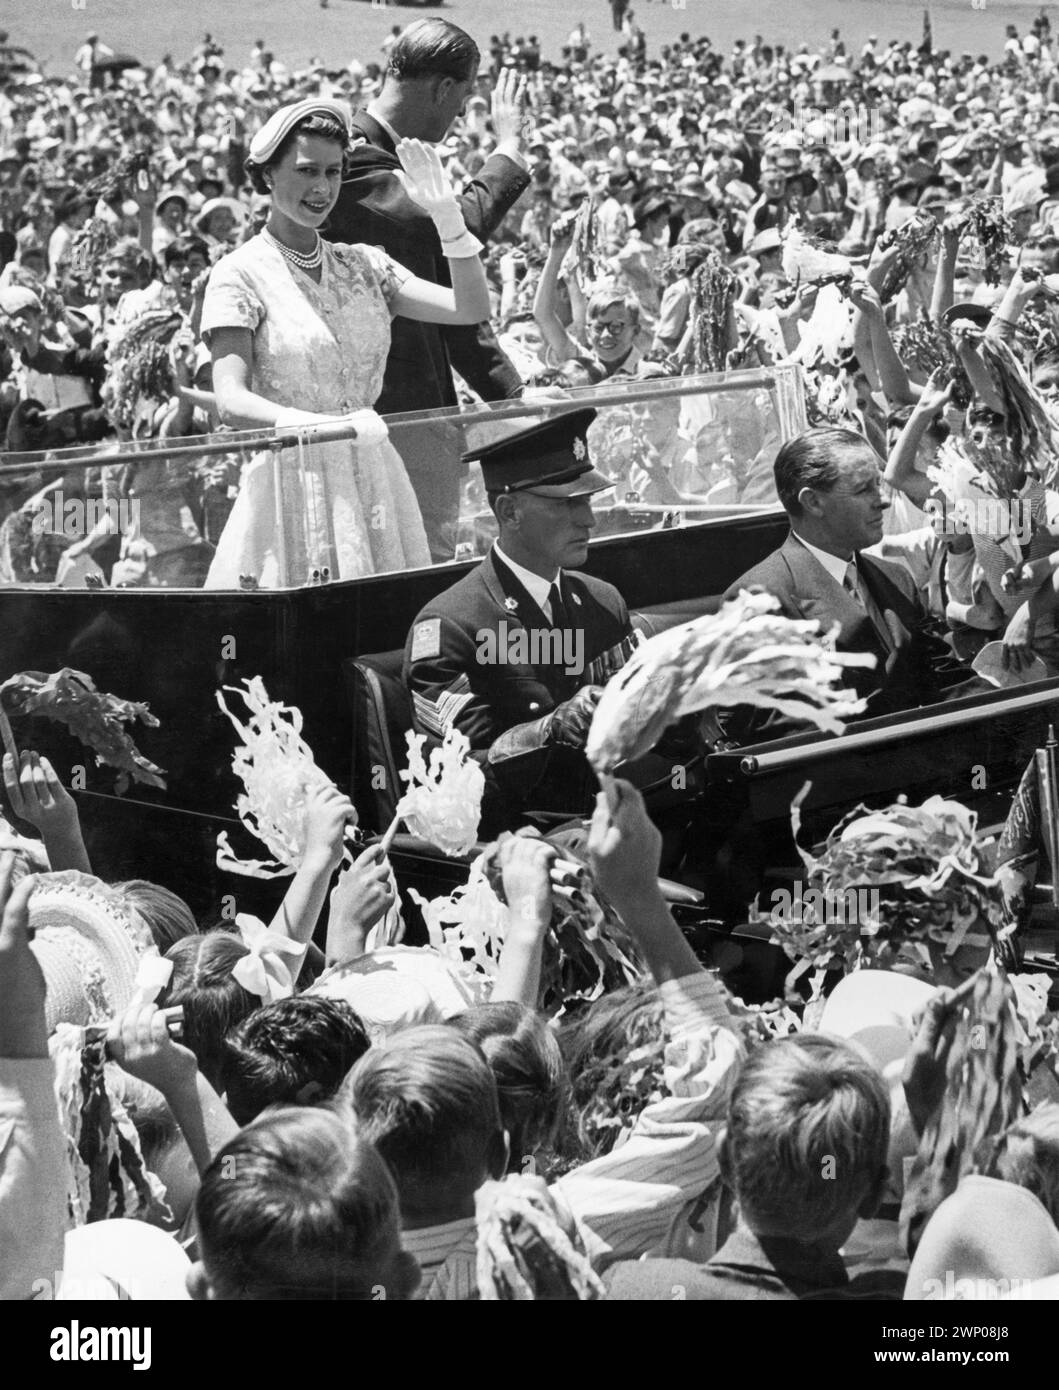 Young Queen Elizabeth II and Prince Philip, Duke of Edinburgh, waving to the crowds during their Royal visit to Brisbane, Queensland, Australia in 1954. Stock Photo